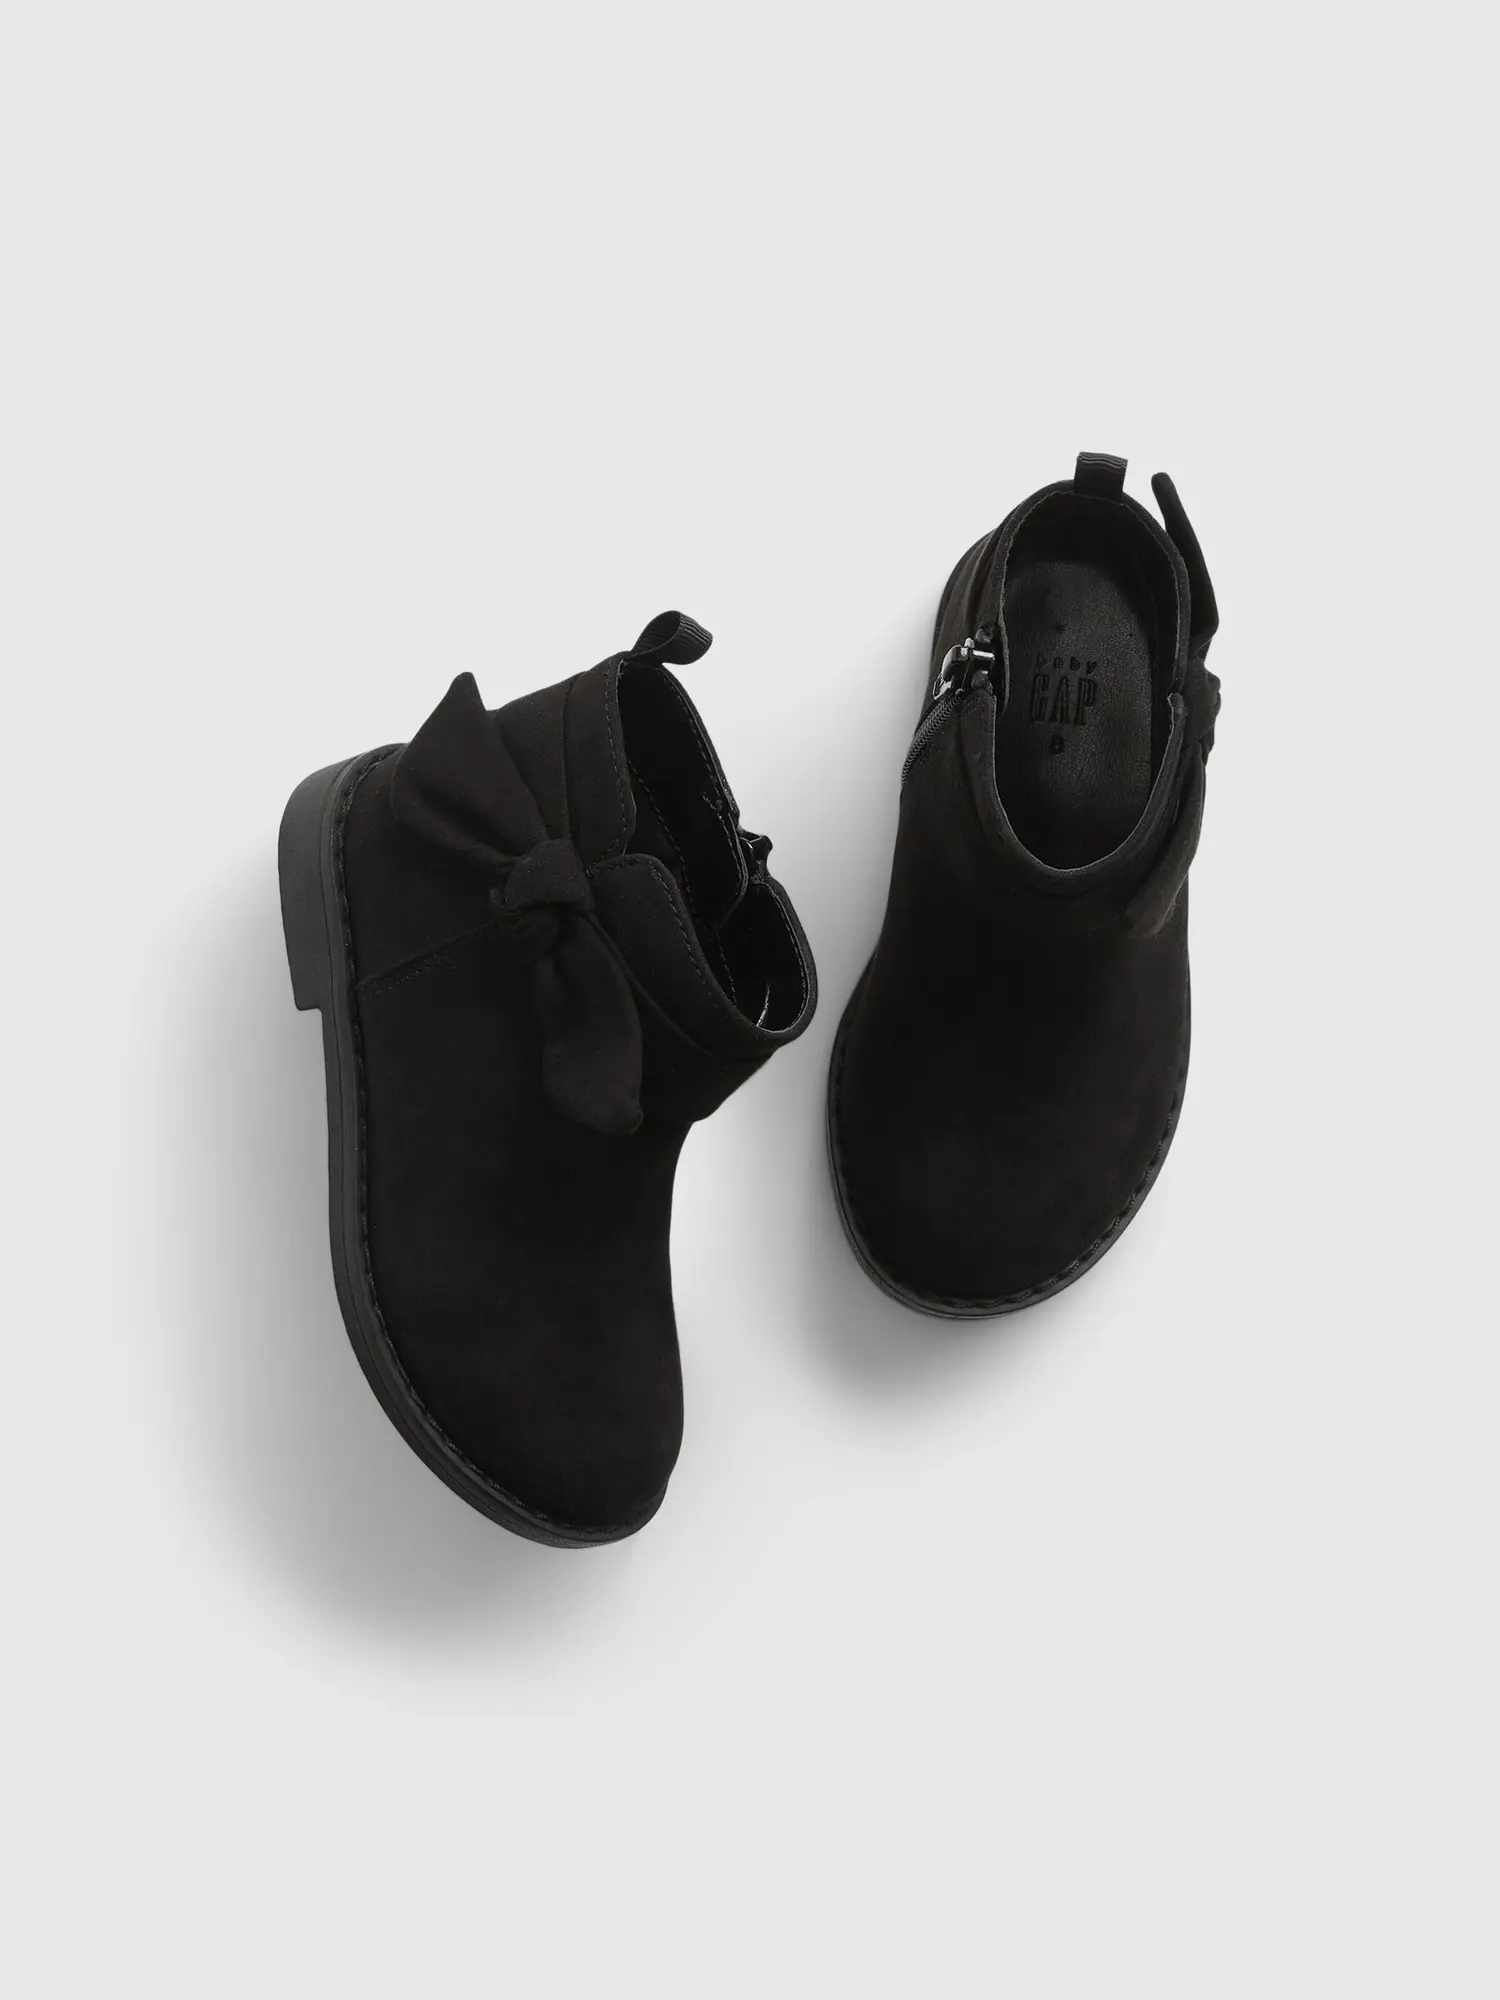 Gap Toddler Bow Boots black. 1